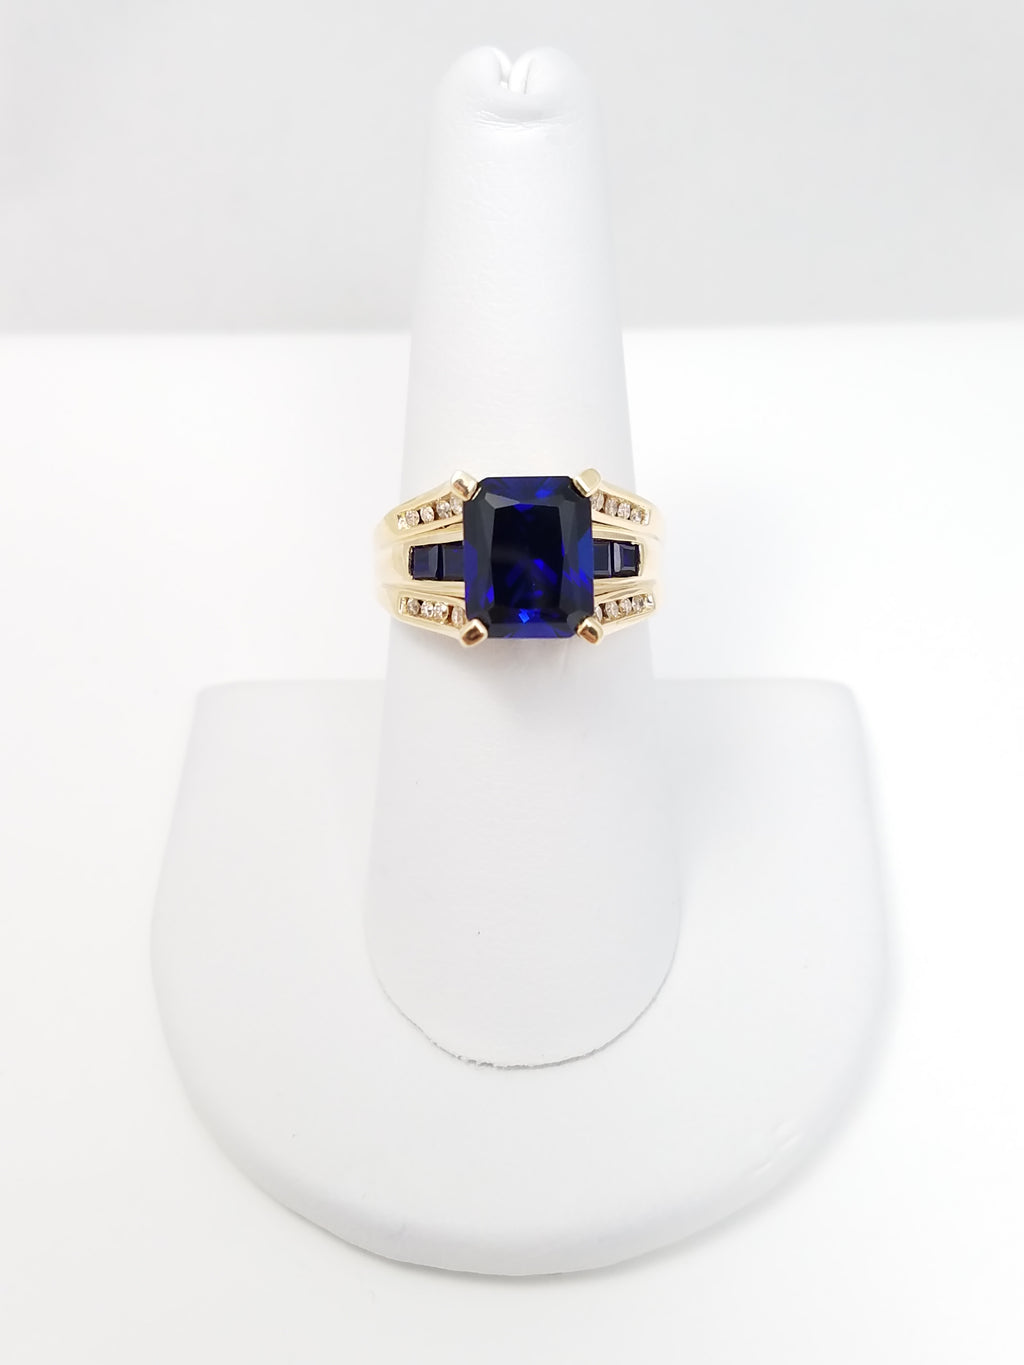 5ctw Synthetic Sapphire 10k Yellow Gold Ring